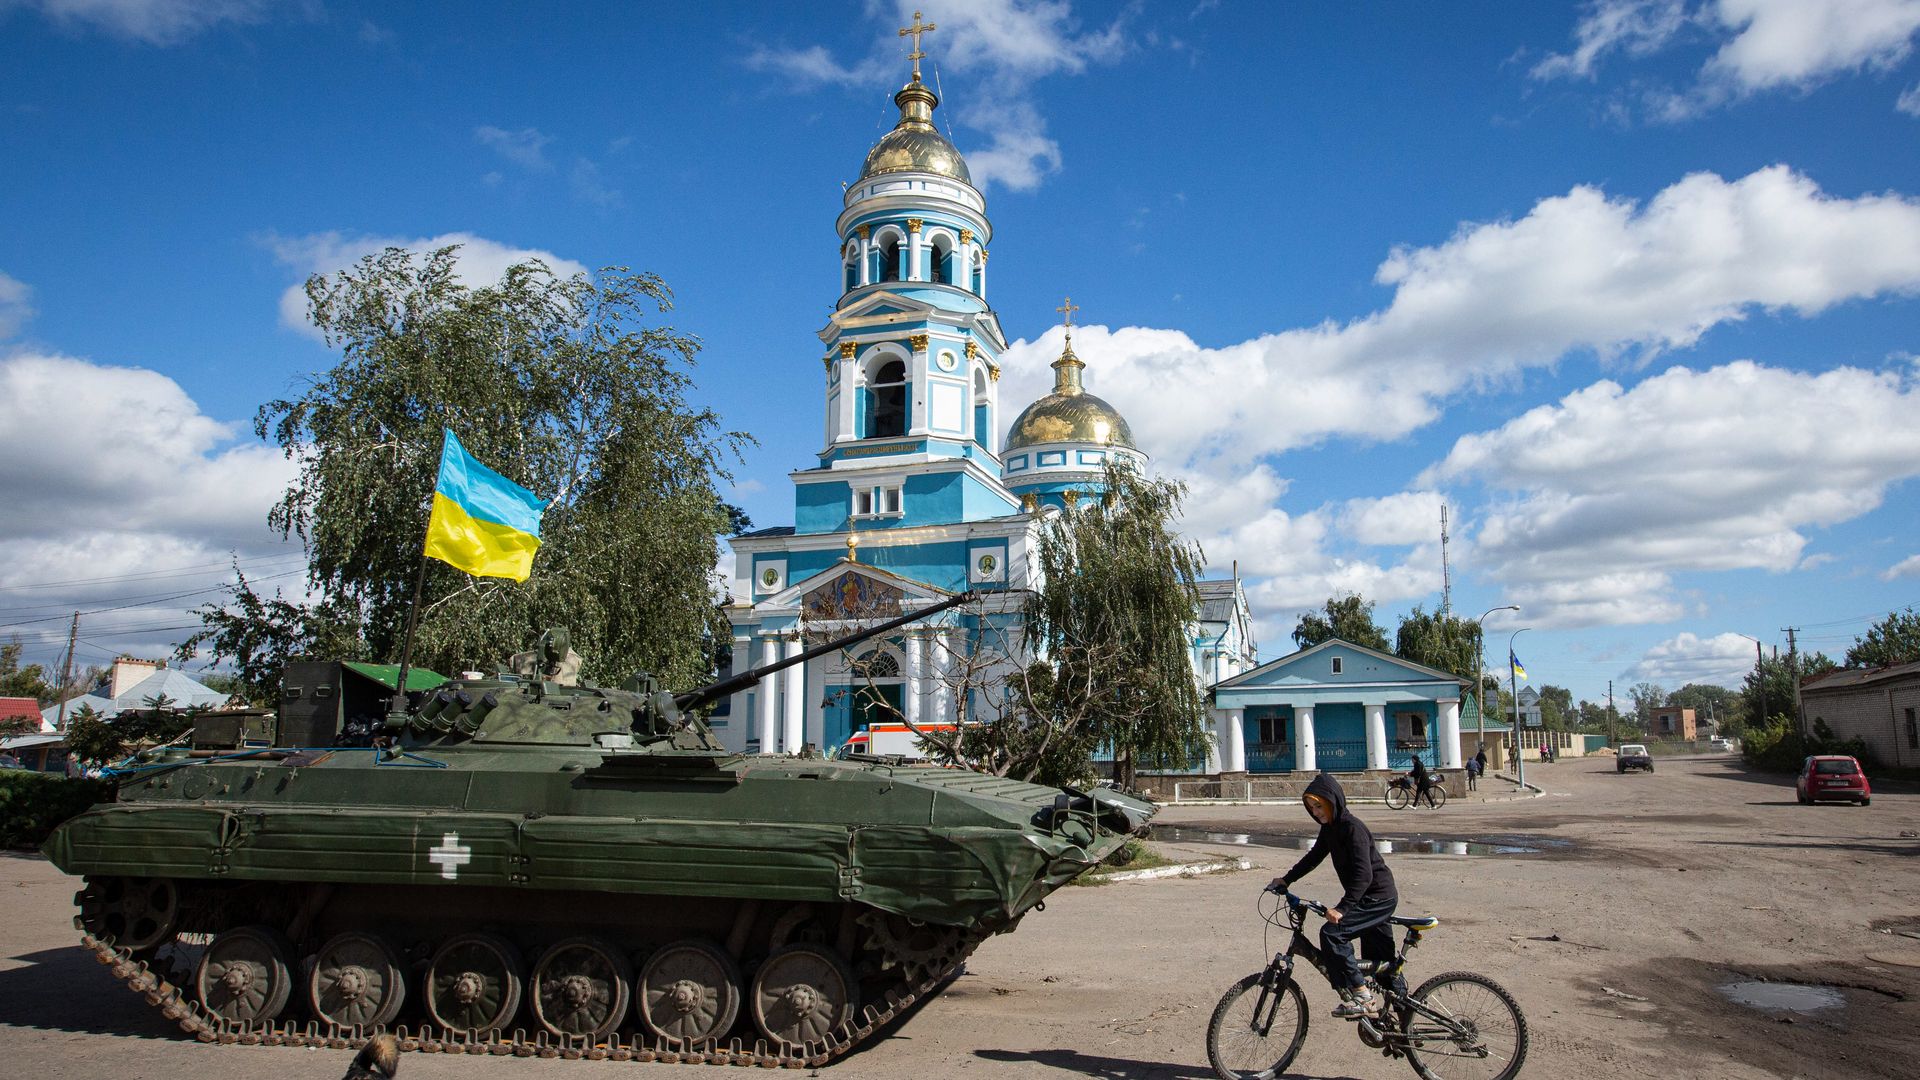 A boy rides a bicycle near an armored tank with a Ukrainian flag in the town of Izium, recently liberated by Ukrainian Armed Forces, in the Kharkiv region